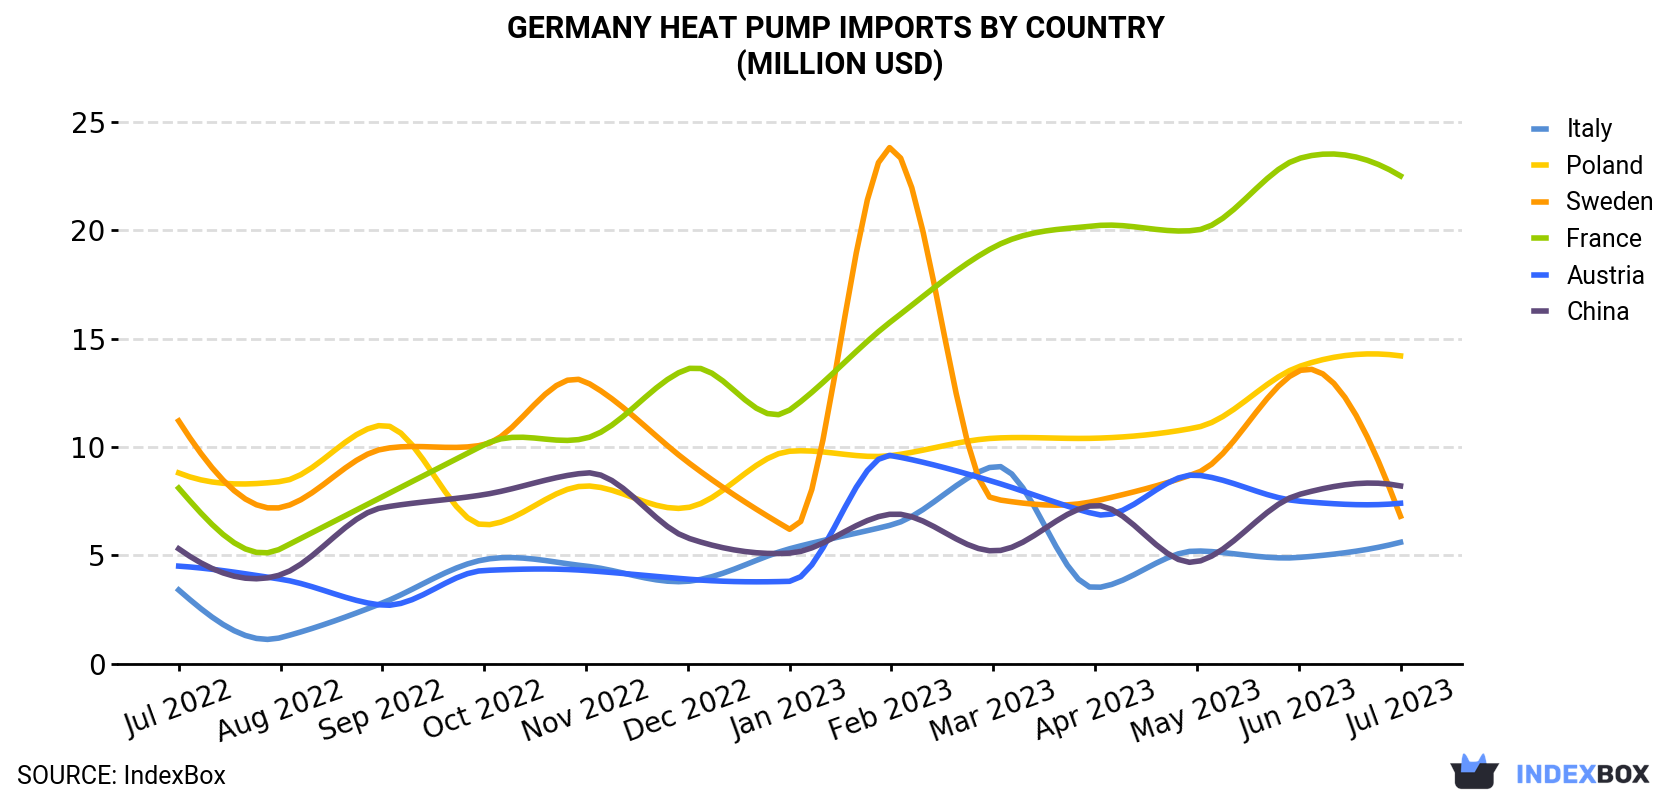 Germany Heat Pump Imports By Country (Million USD)